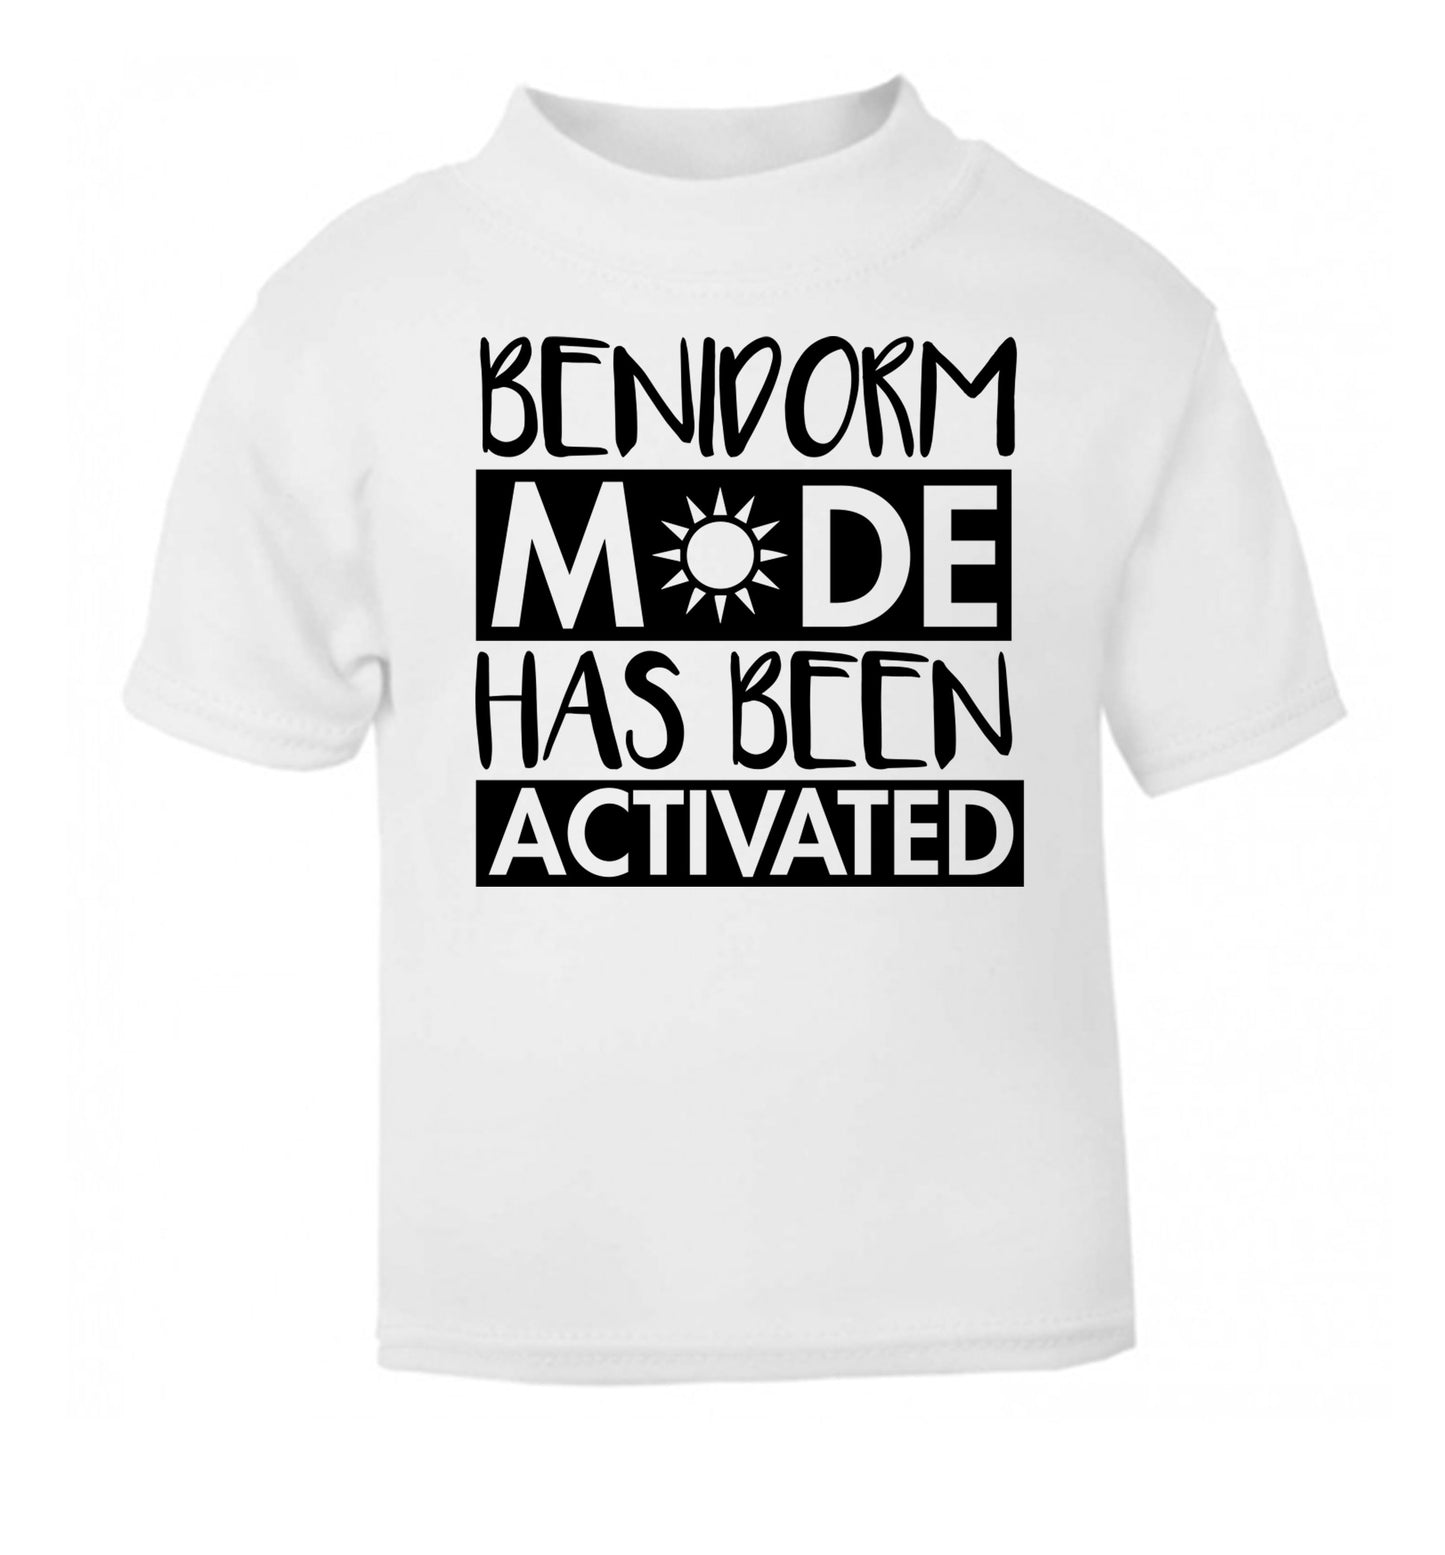 Benidorm mode has been activated white Baby Toddler Tshirt 2 Years